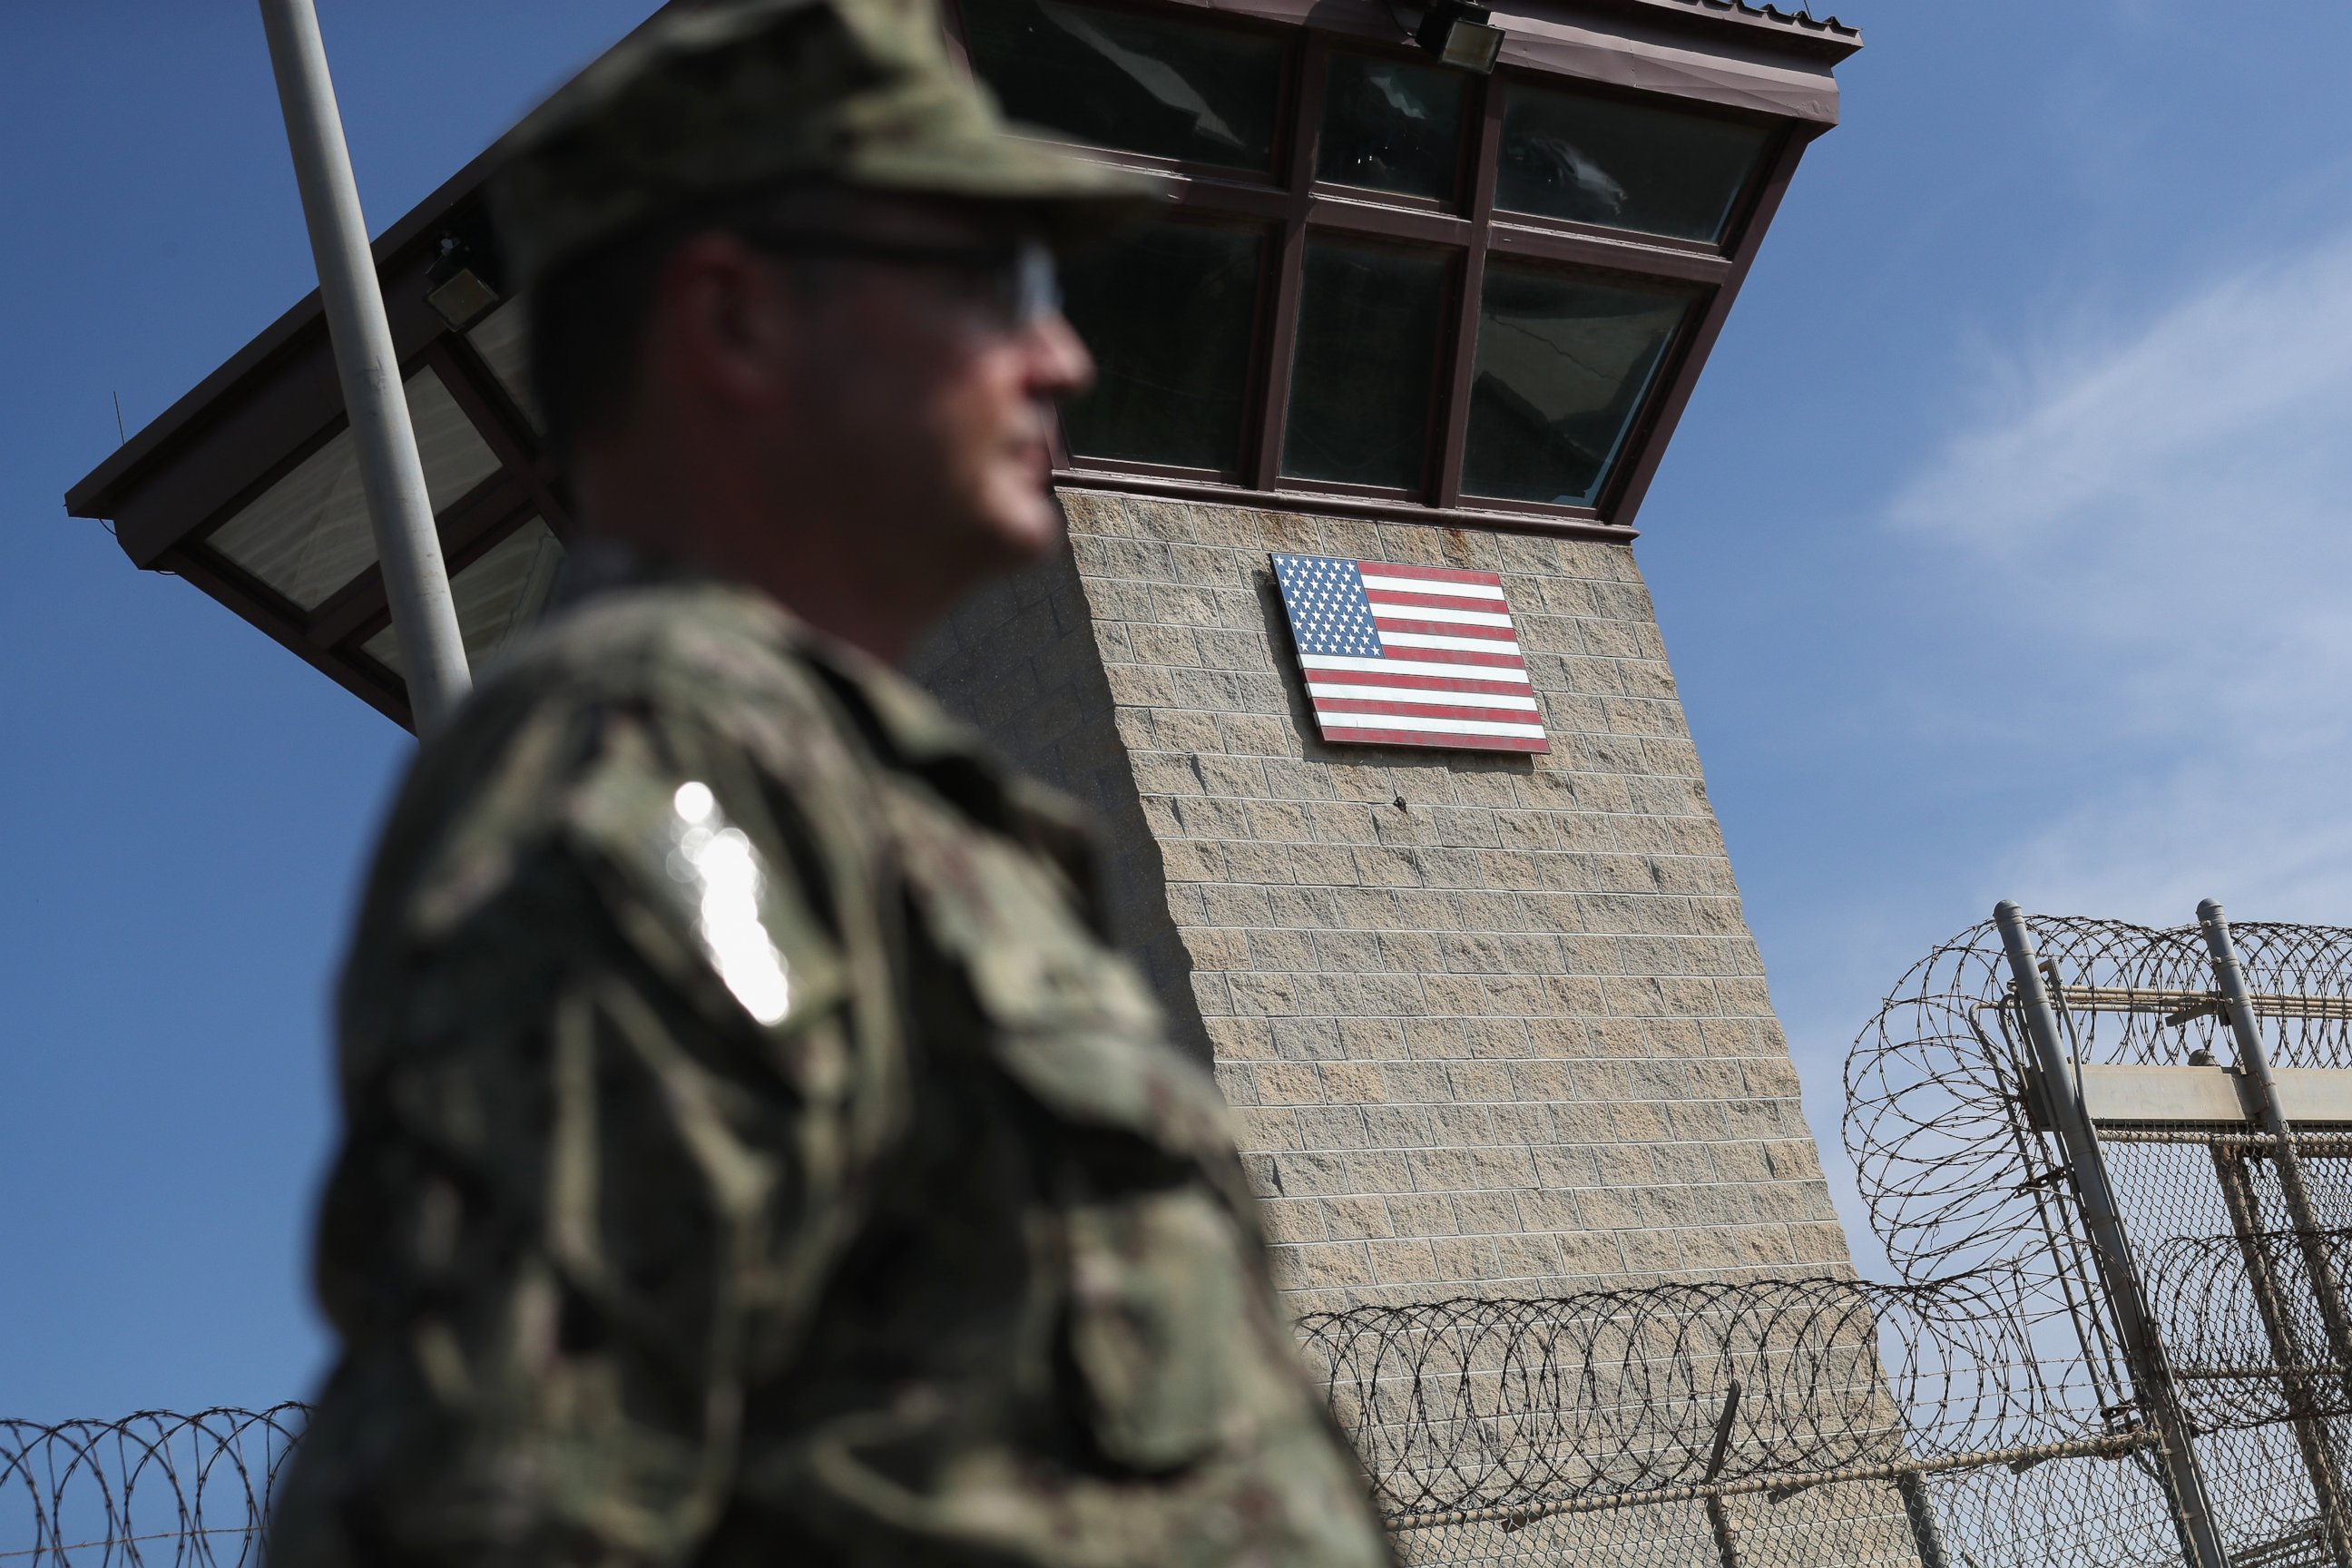 PHOTO: A U.S. Naval officer stands at the entrance of the U.S. prison at Guantanamo Bay, also known as "Gitmo," on Oct. 22, 2016, at the U.S. Naval Station at Guantanamo Bay, Cuba.